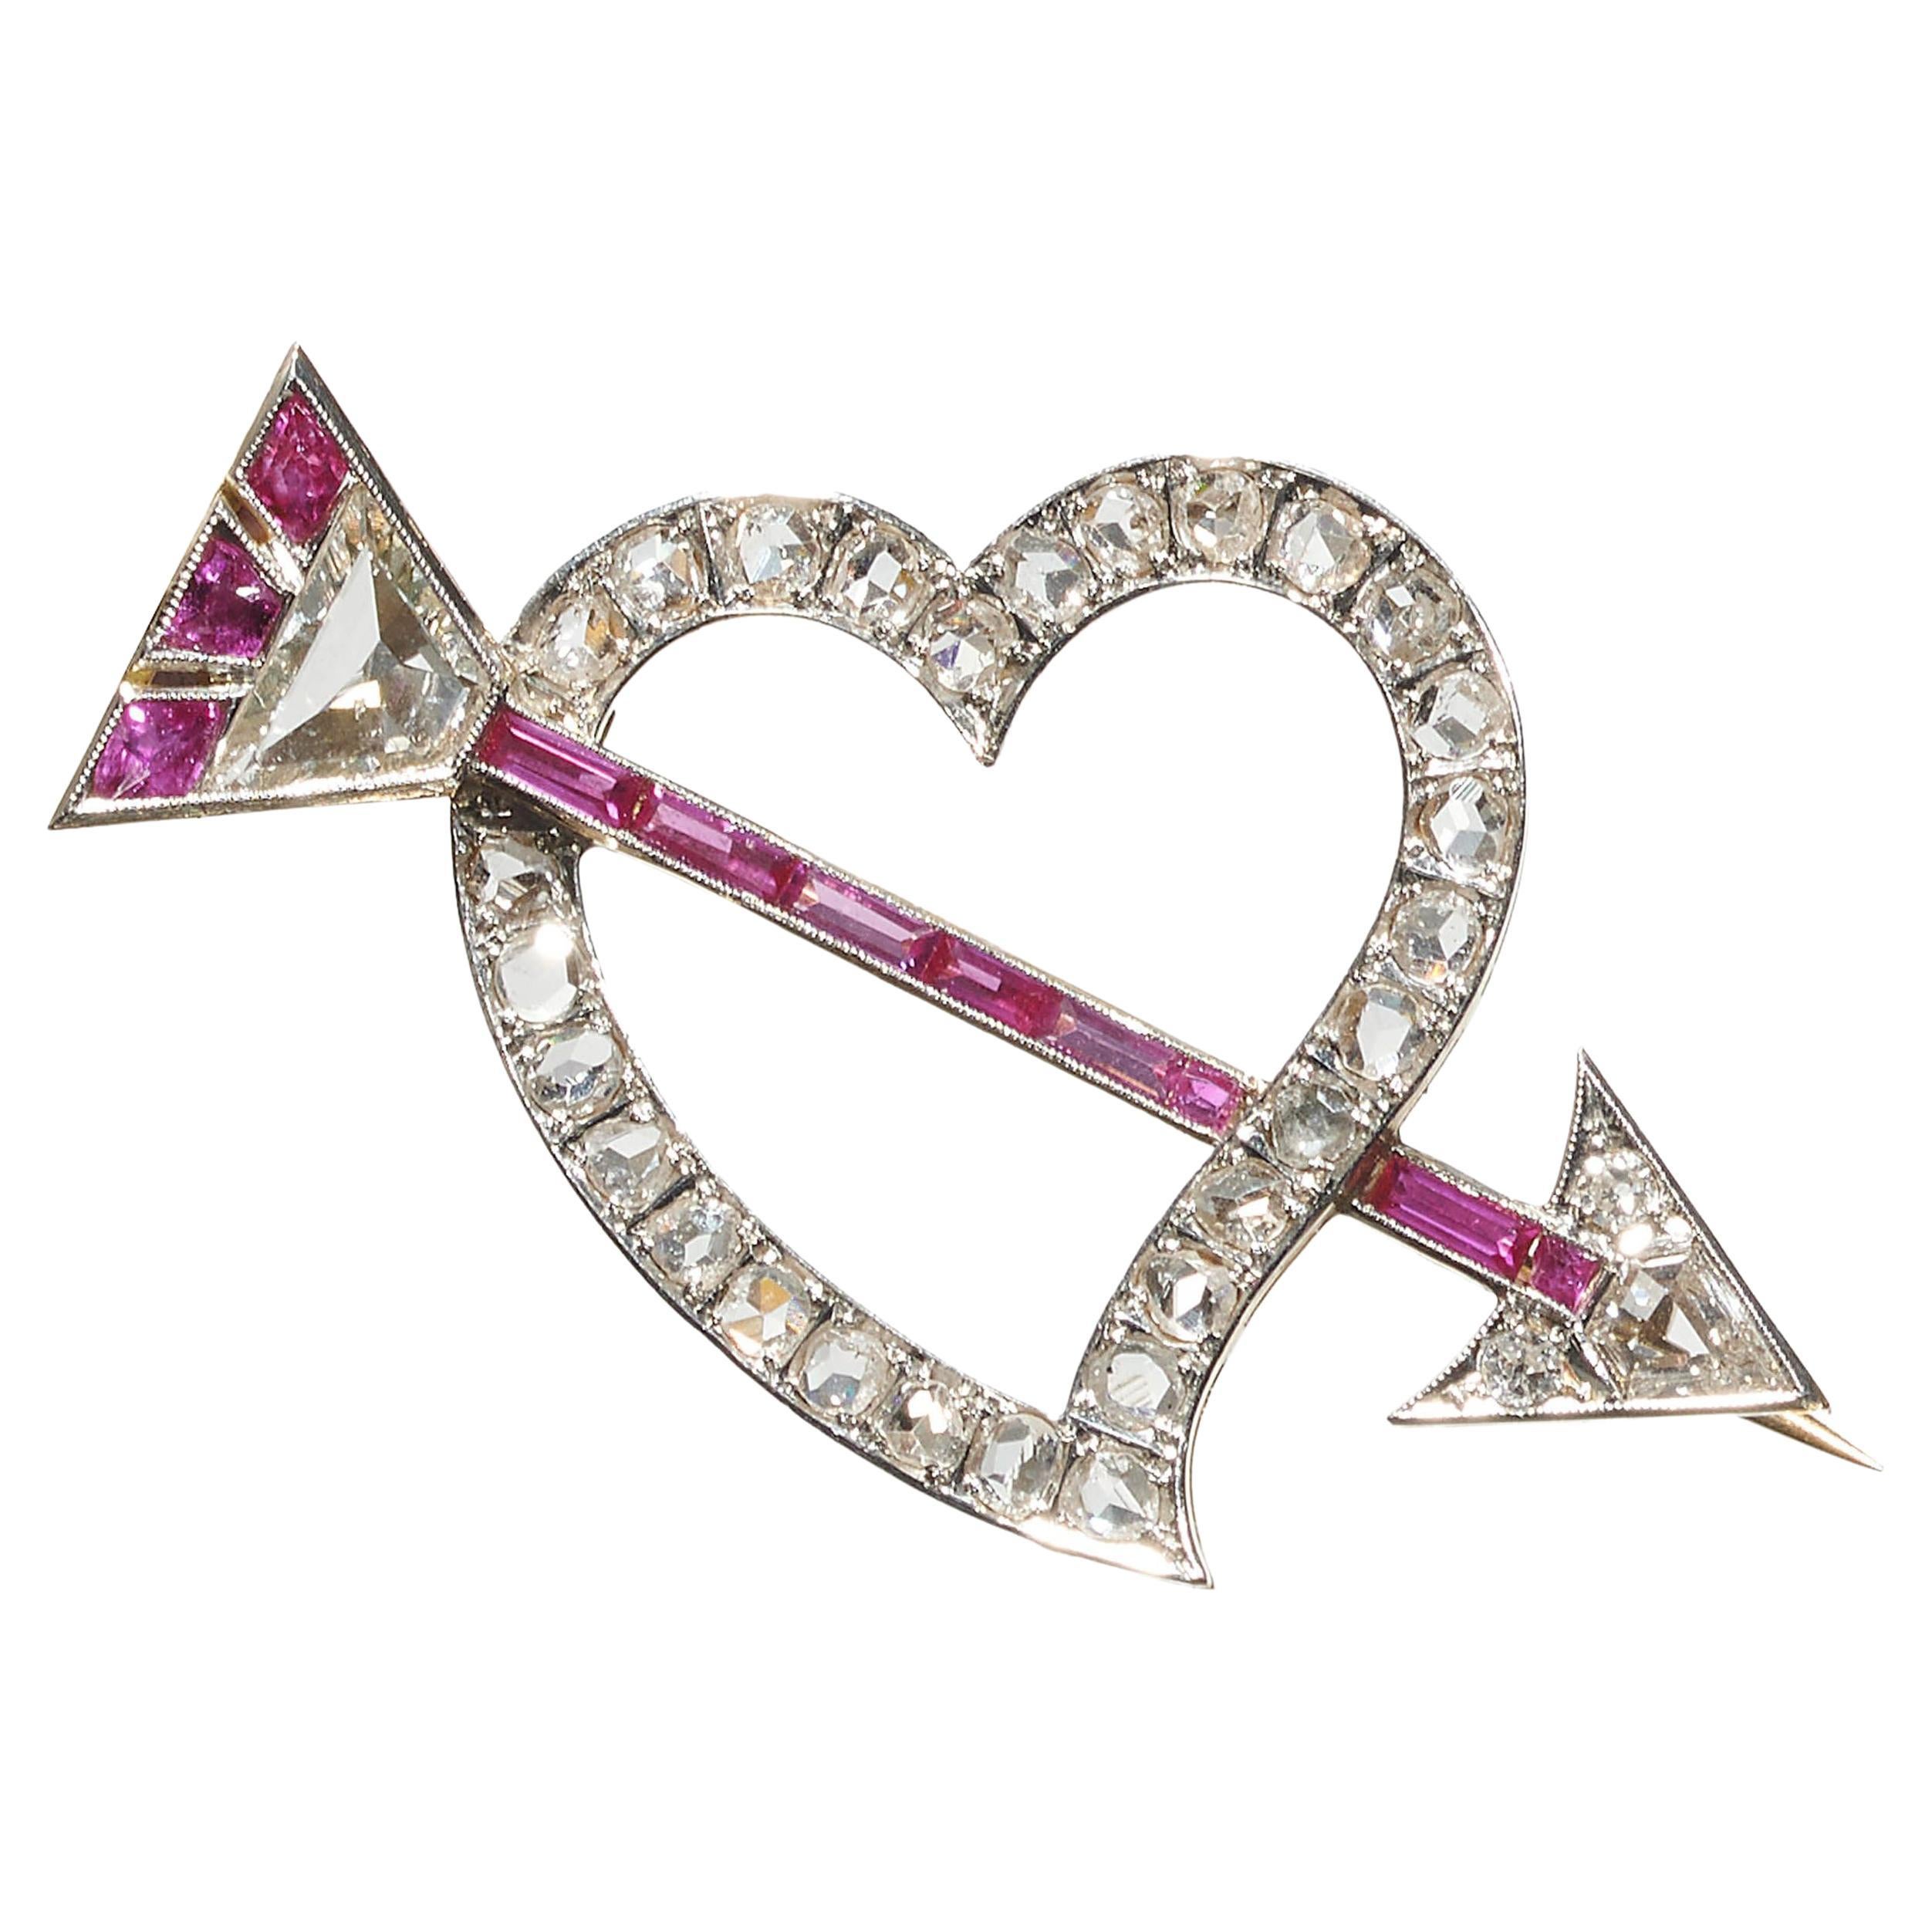 Antique Portuguese Diamond and Ruby Heart and Arrow Brooch, circa 1930